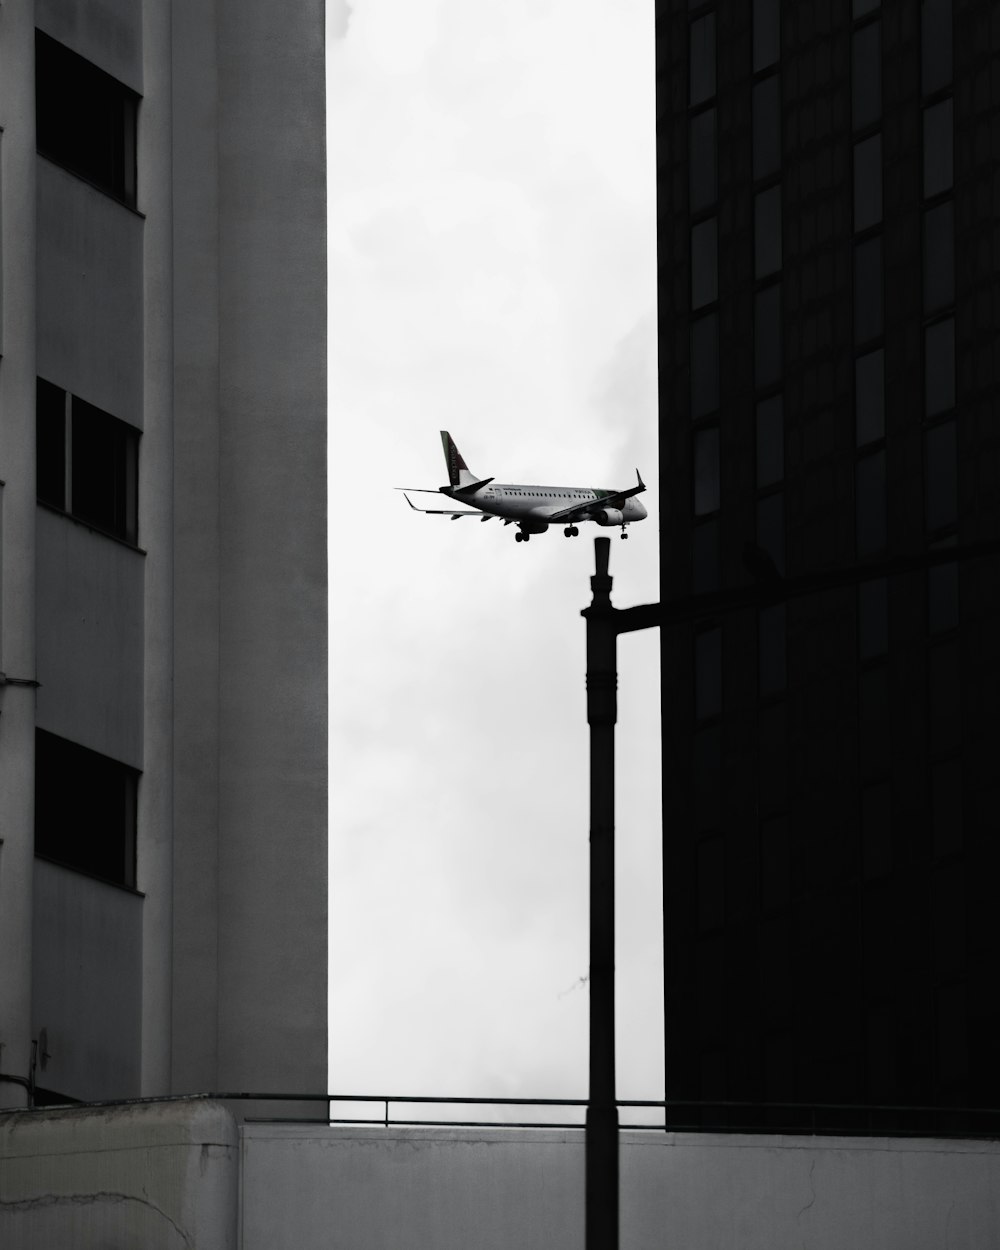 an airplane is flying over a building and a street light